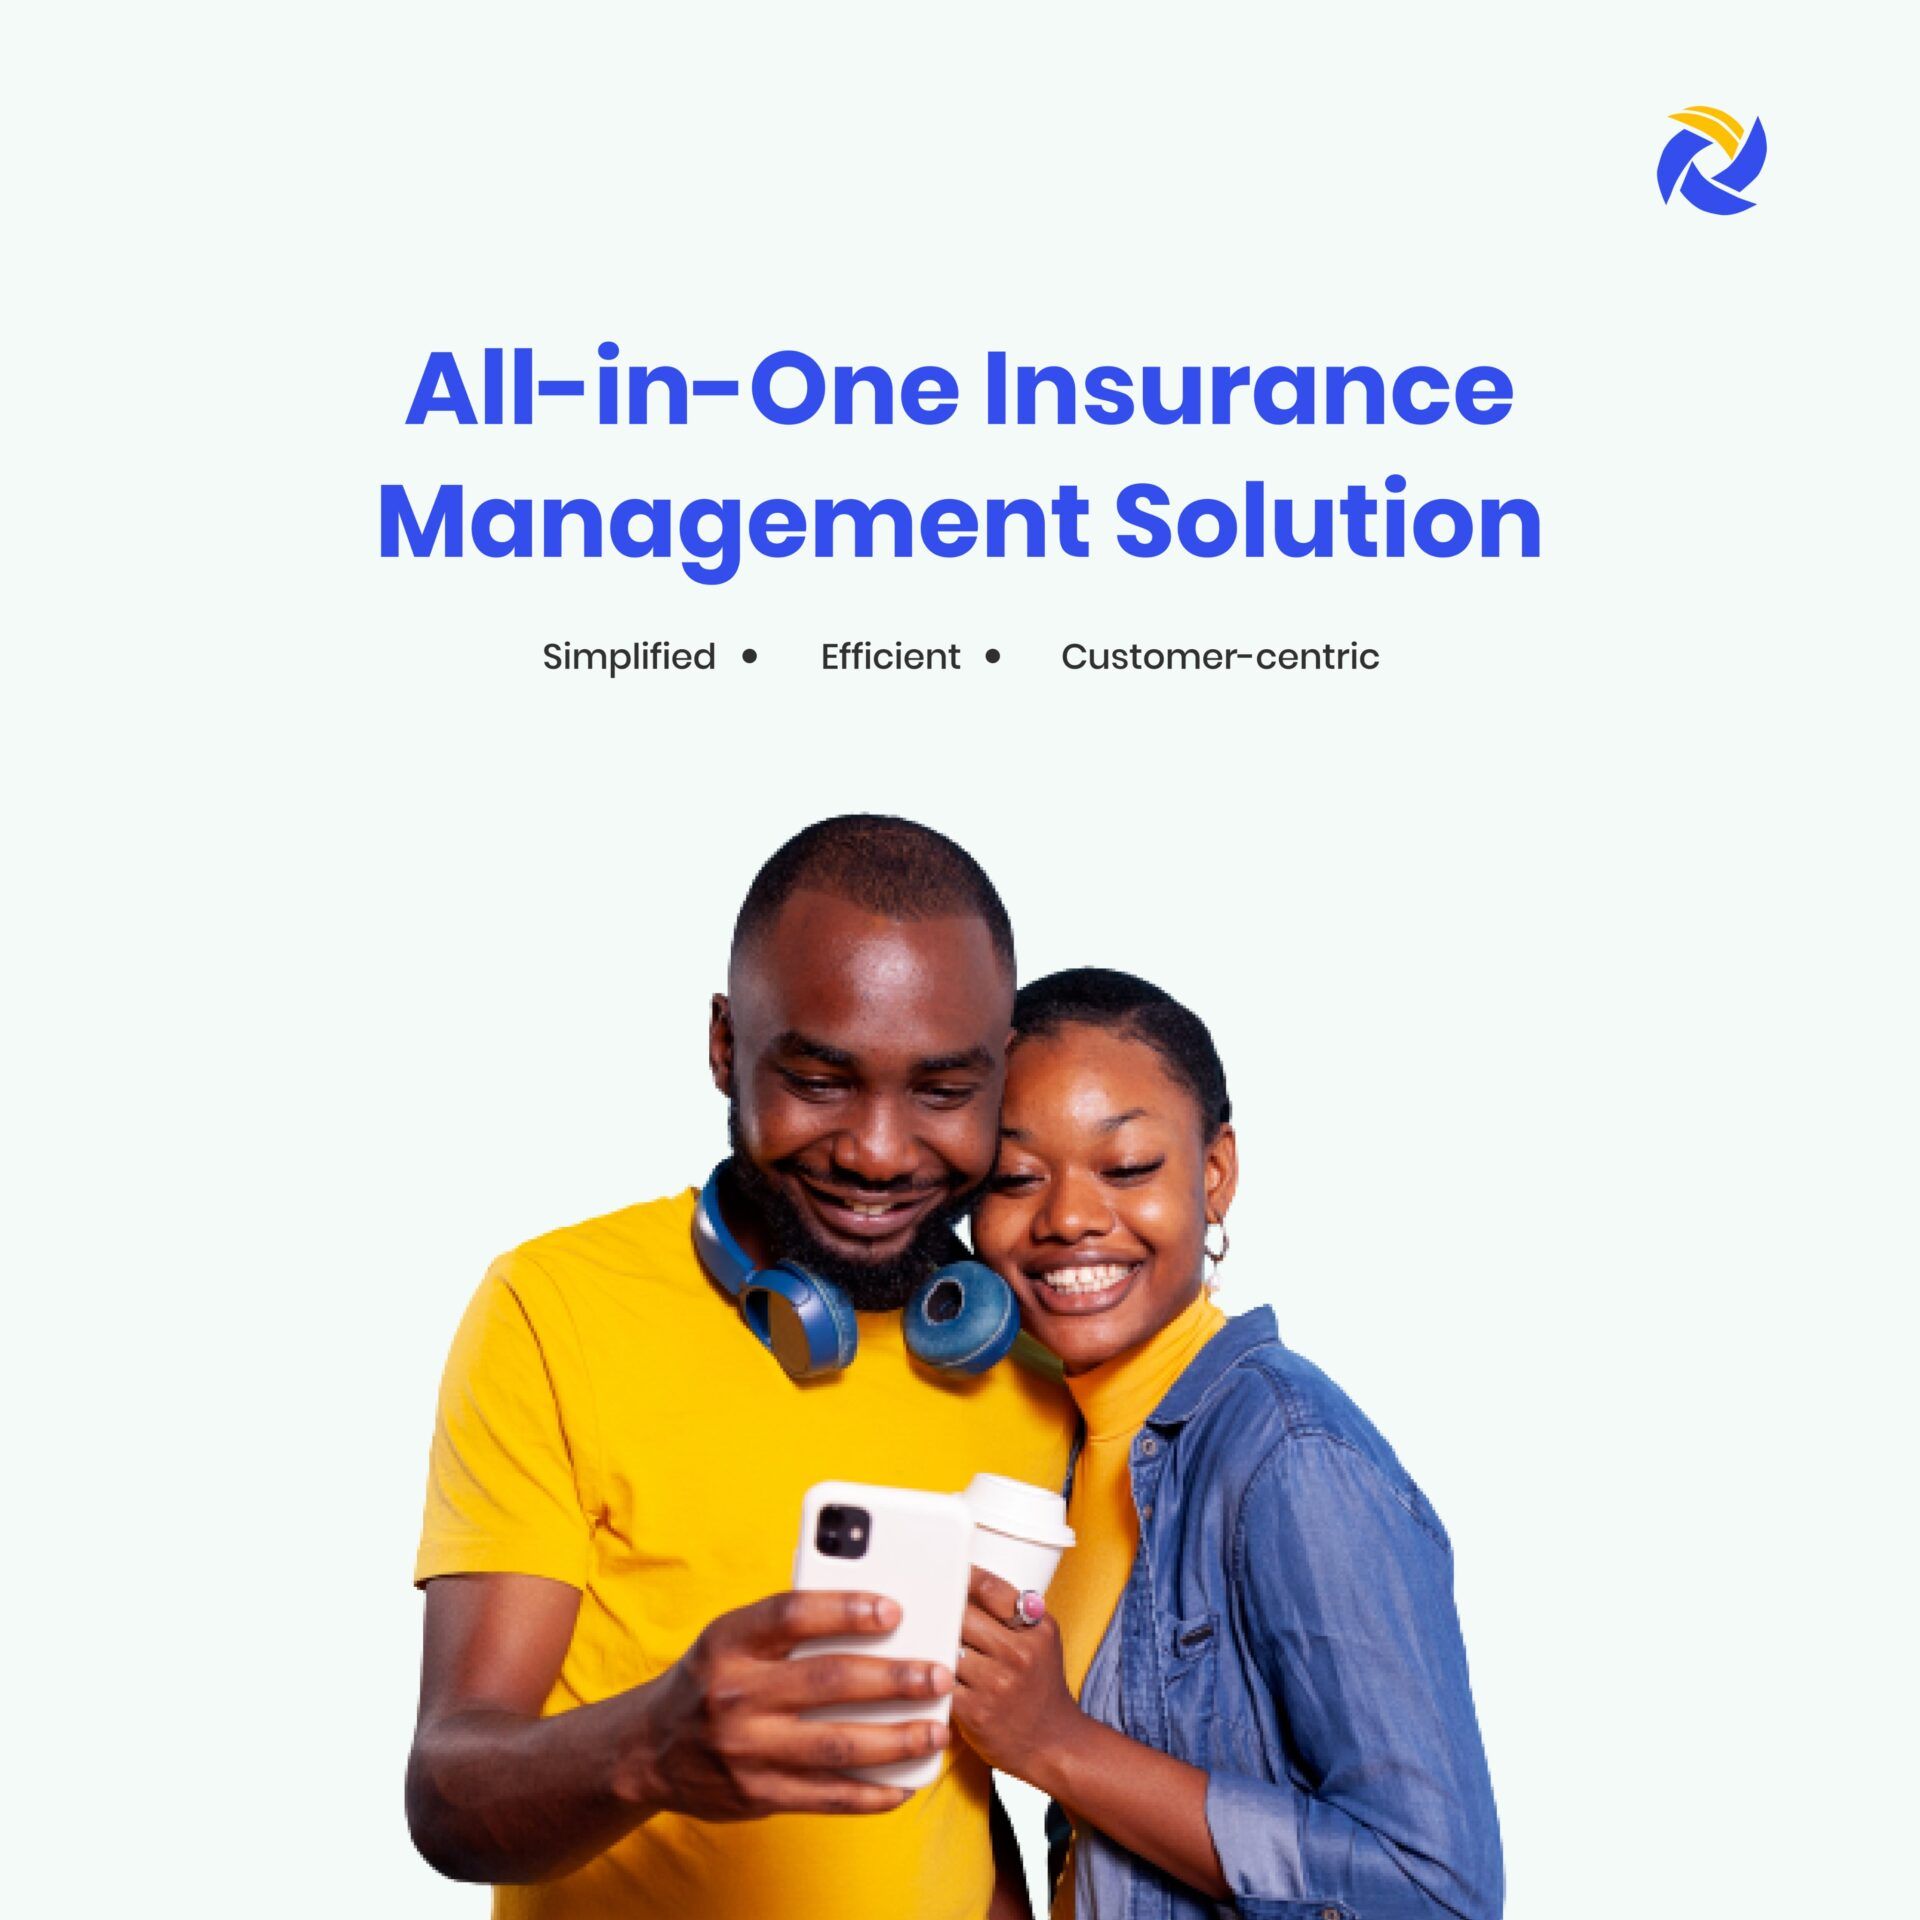 Backend Stories: Gbenro Dara's Insurtech startup, Octamile, is enabling insurance access to every social class 